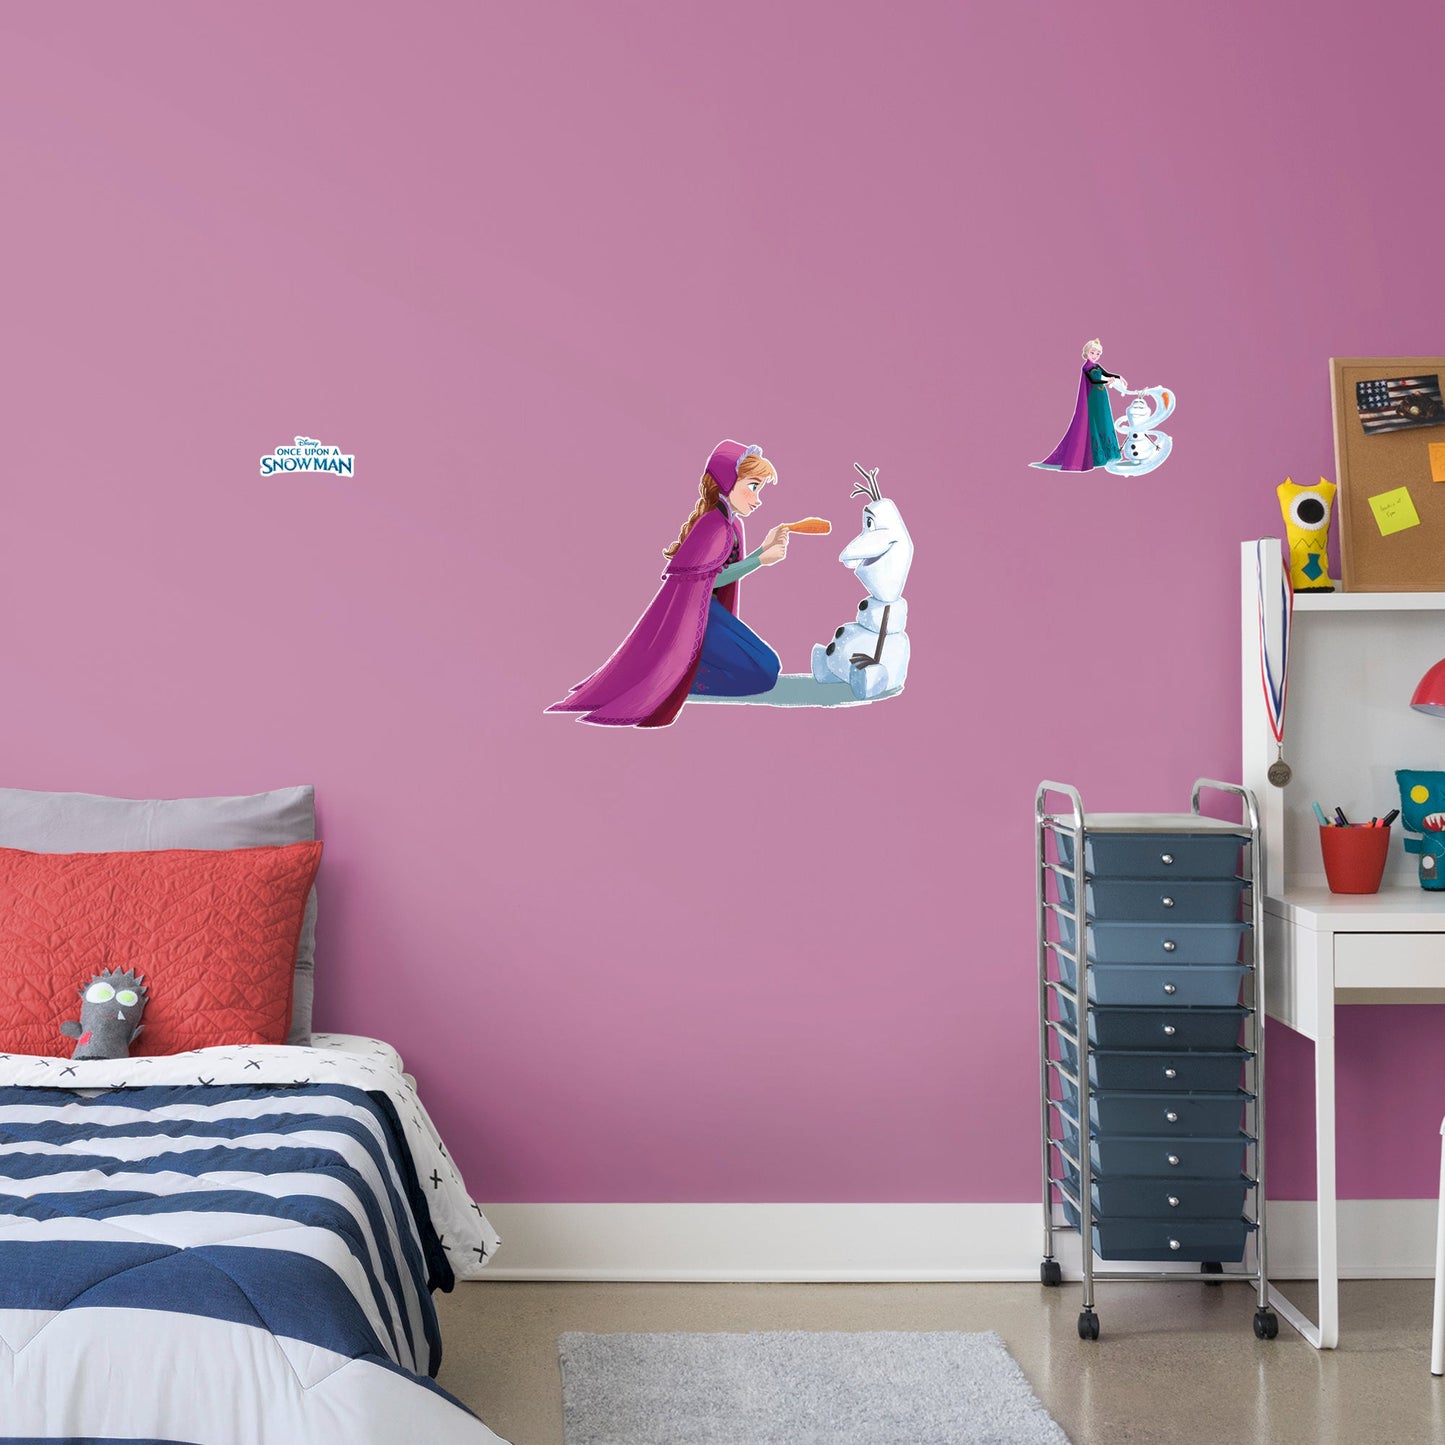 Olaf & Anna: Nose - Frozen - Once Upon A Snowman - Officially Licensed Disney Removable Wall Decal